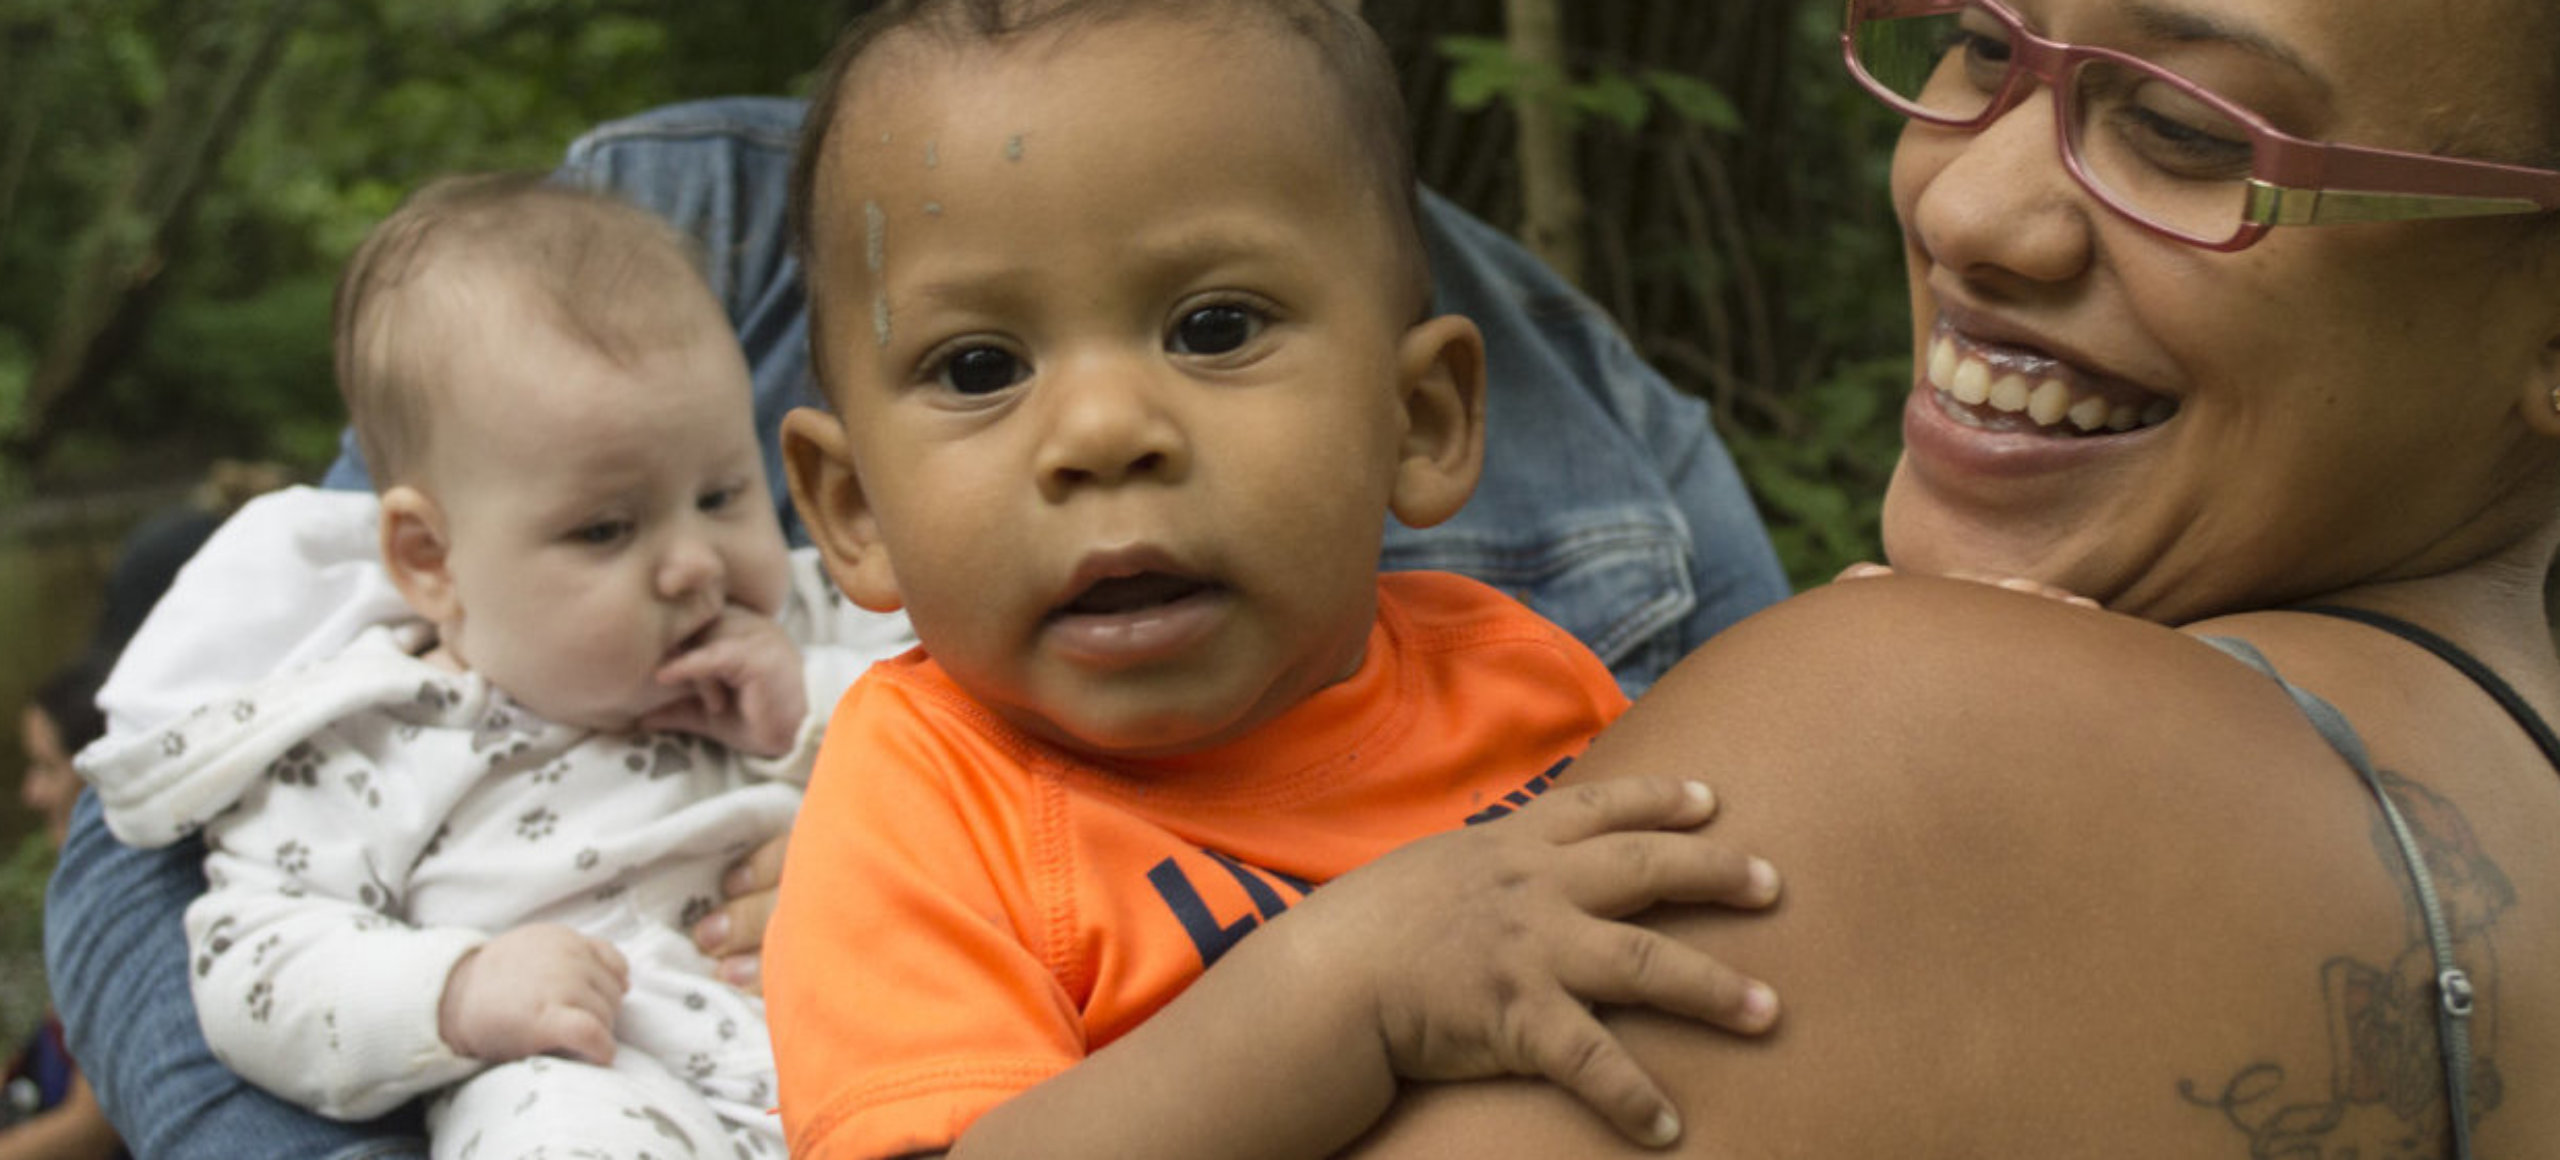 A baby wearing a orange shirt looks at the camera while a woman smiles at the baby. In the backround another baby chews on their fingers.